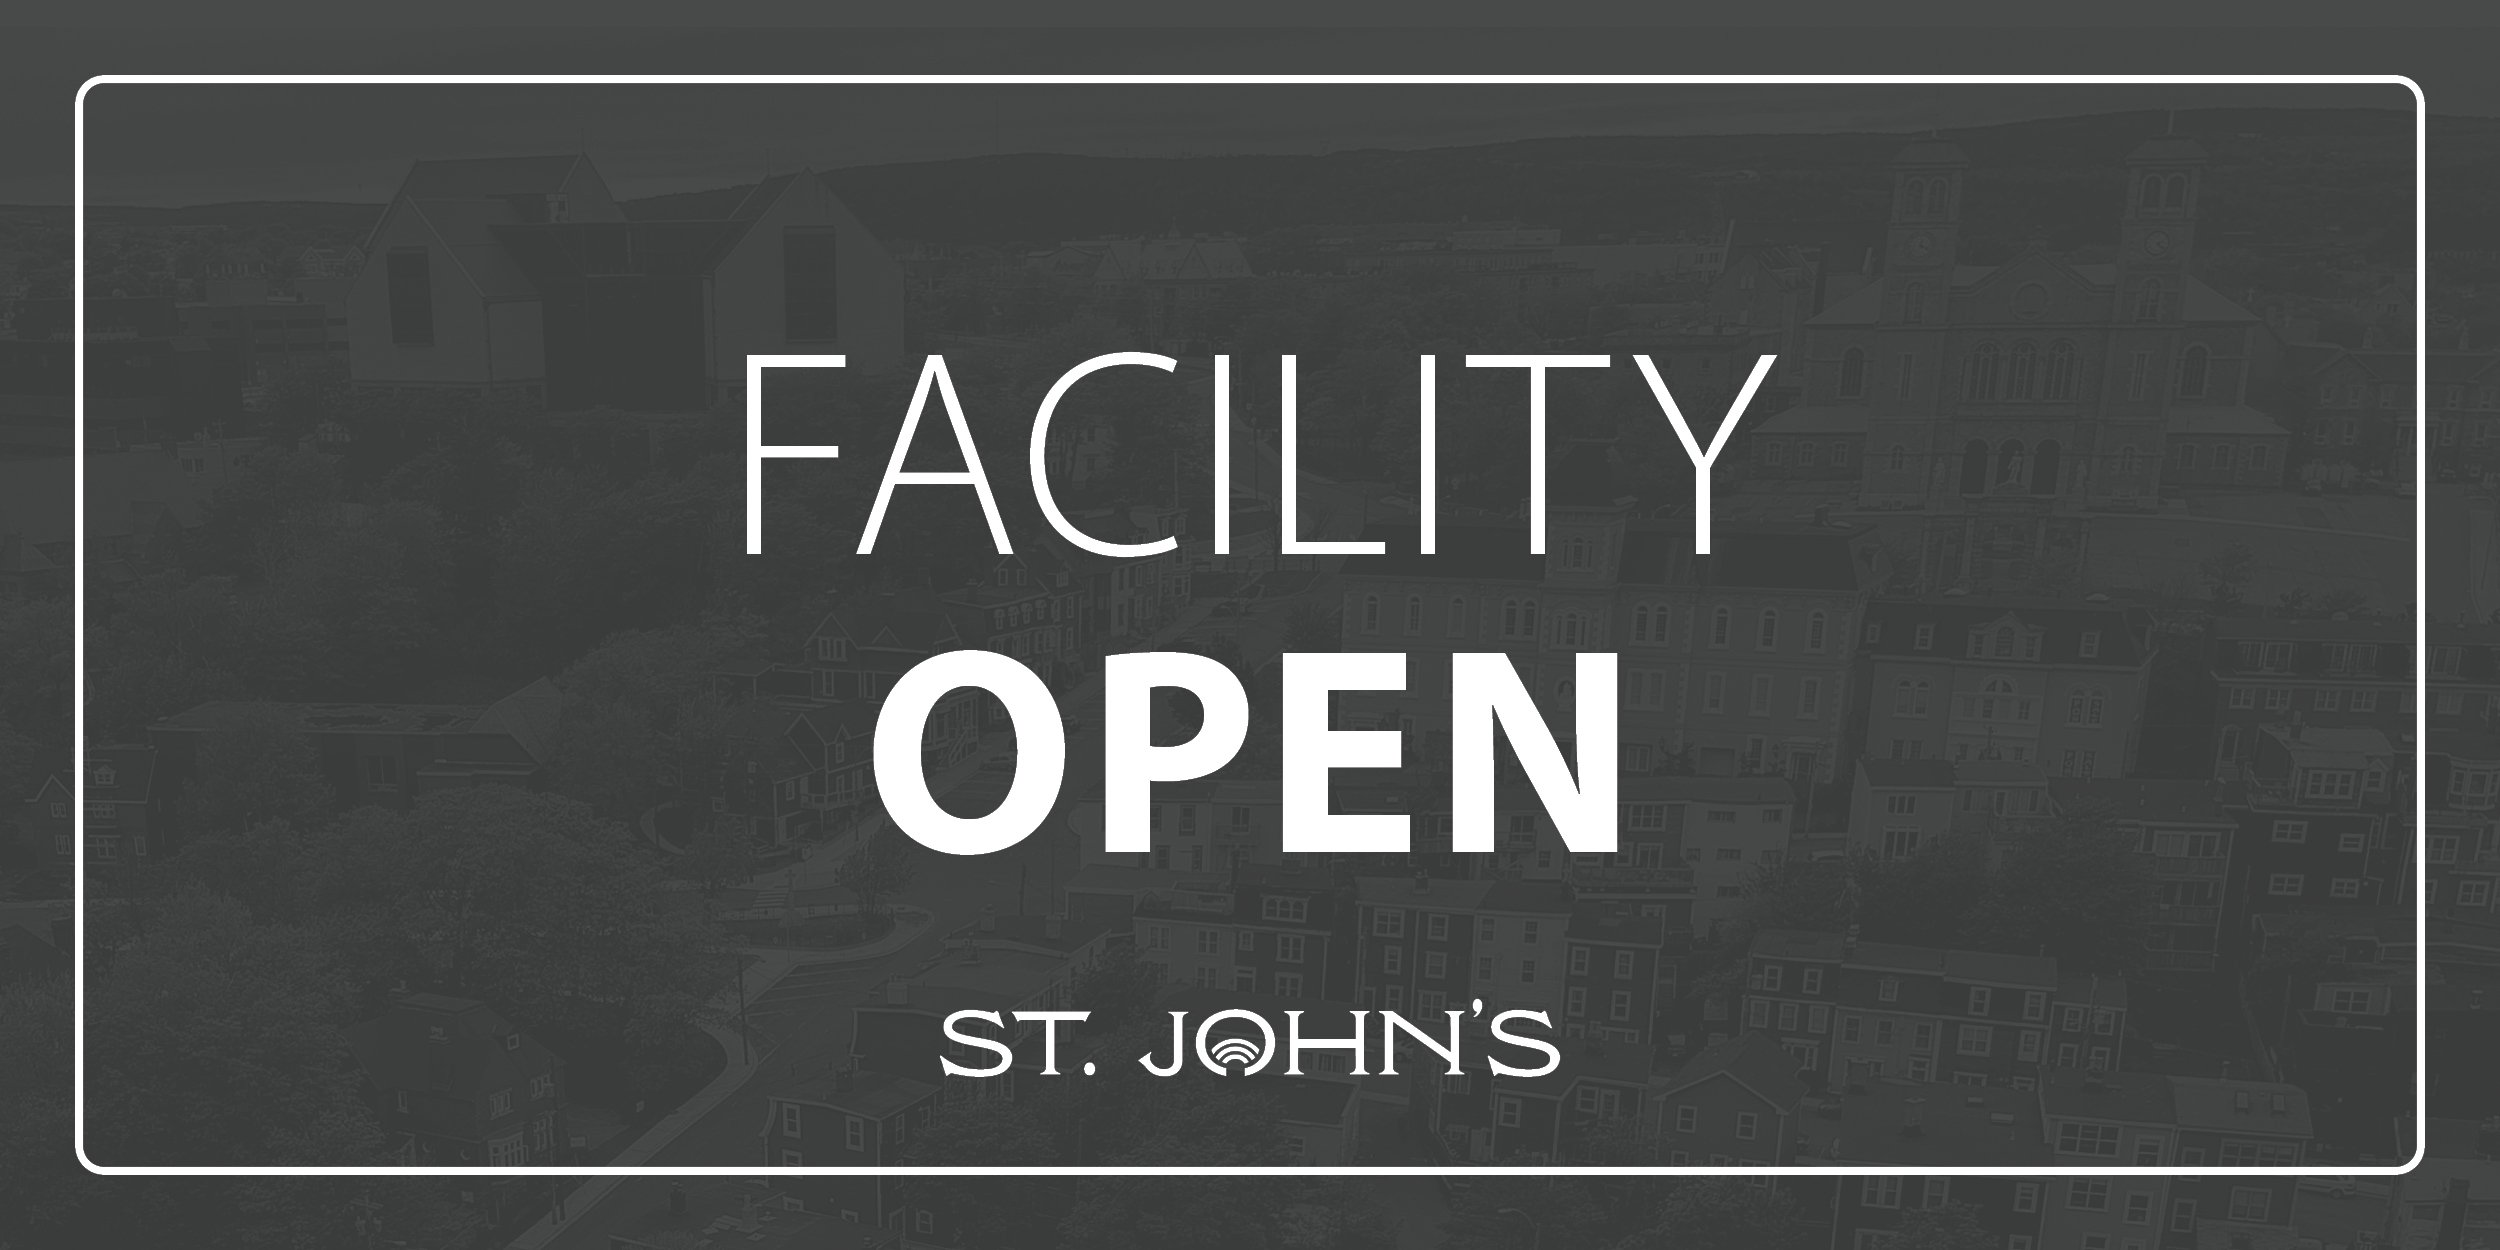 grey background with white text that says facility open